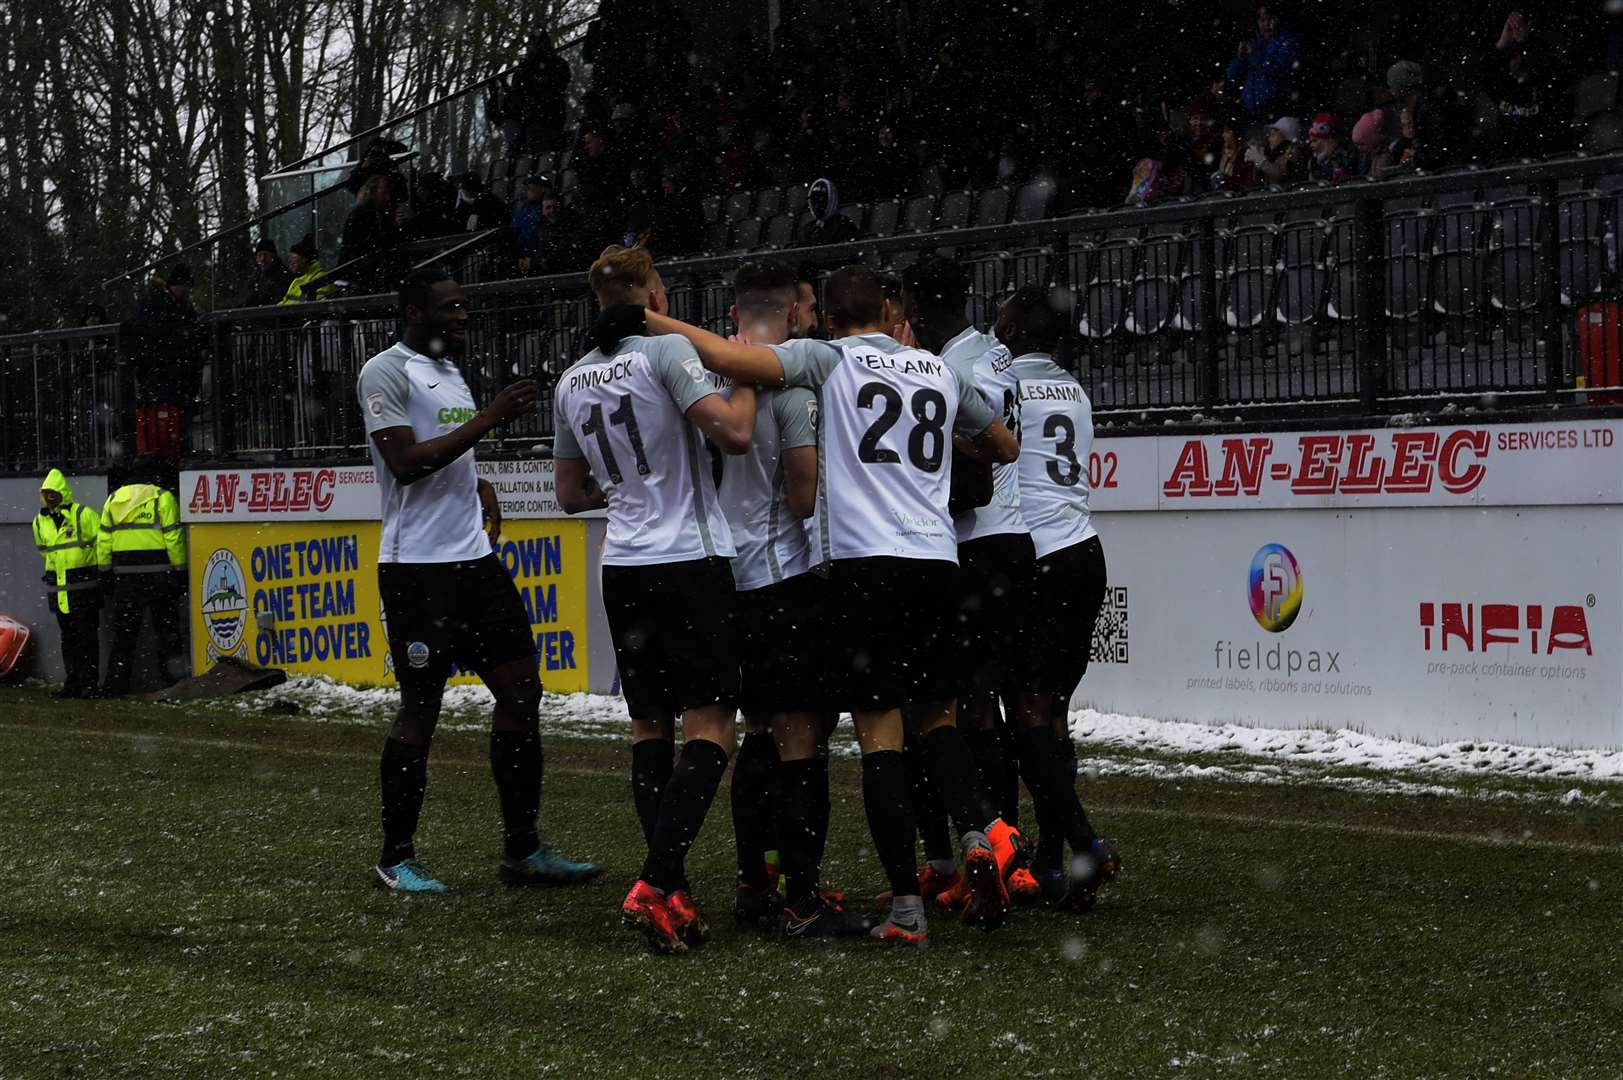 Dover Athletic FC, Crabble, Dover. Dover (black/white) v Maccelsfield in National League. Dover celebrate the first goal.Picture: Tony Flashman (1209269)